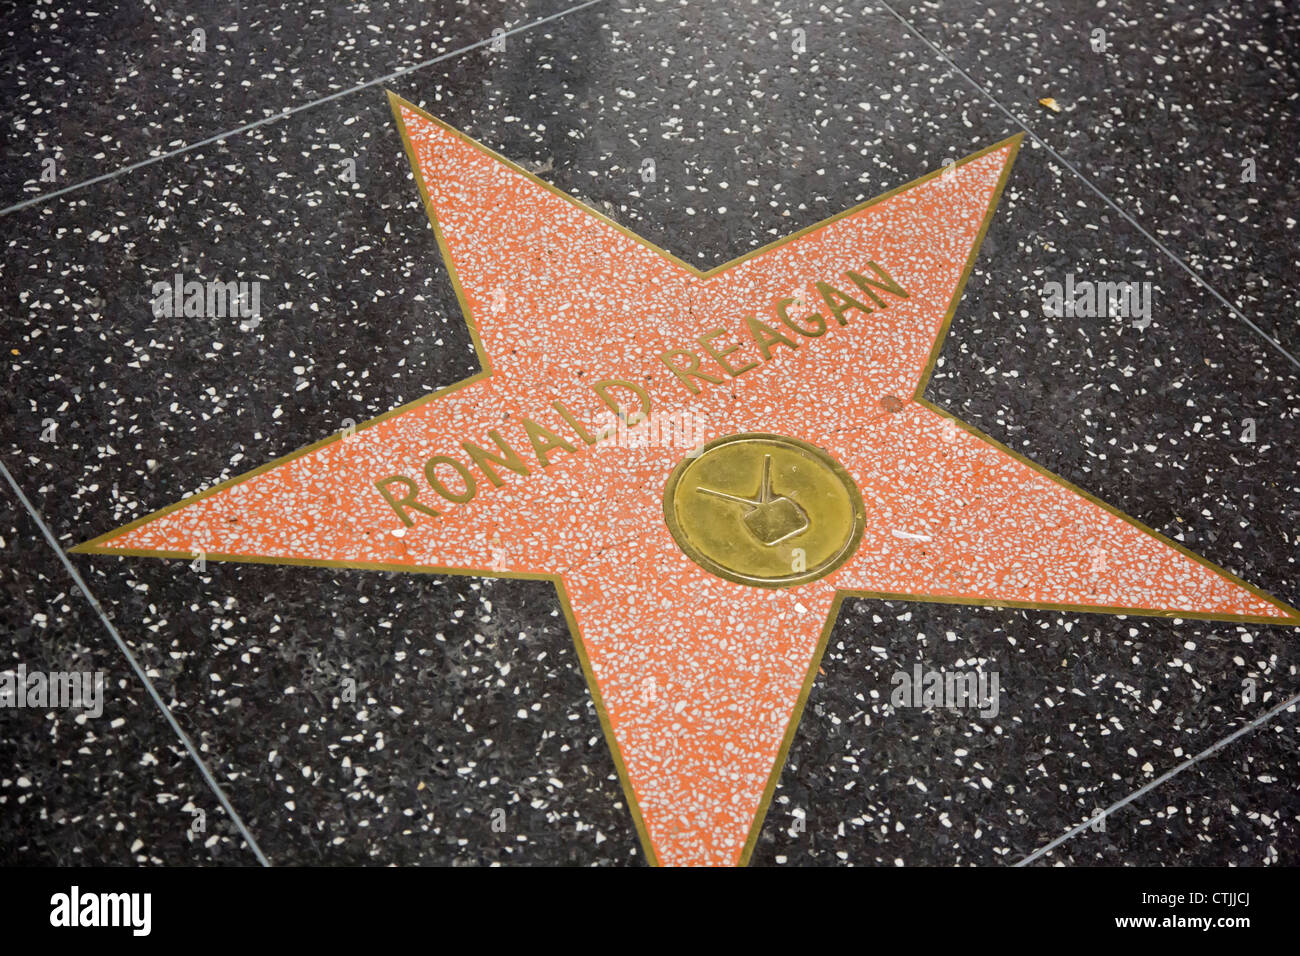 Los Angeles, California - Ronald Reagan's star in the Hollywood Walk of Fame. Stock Photo